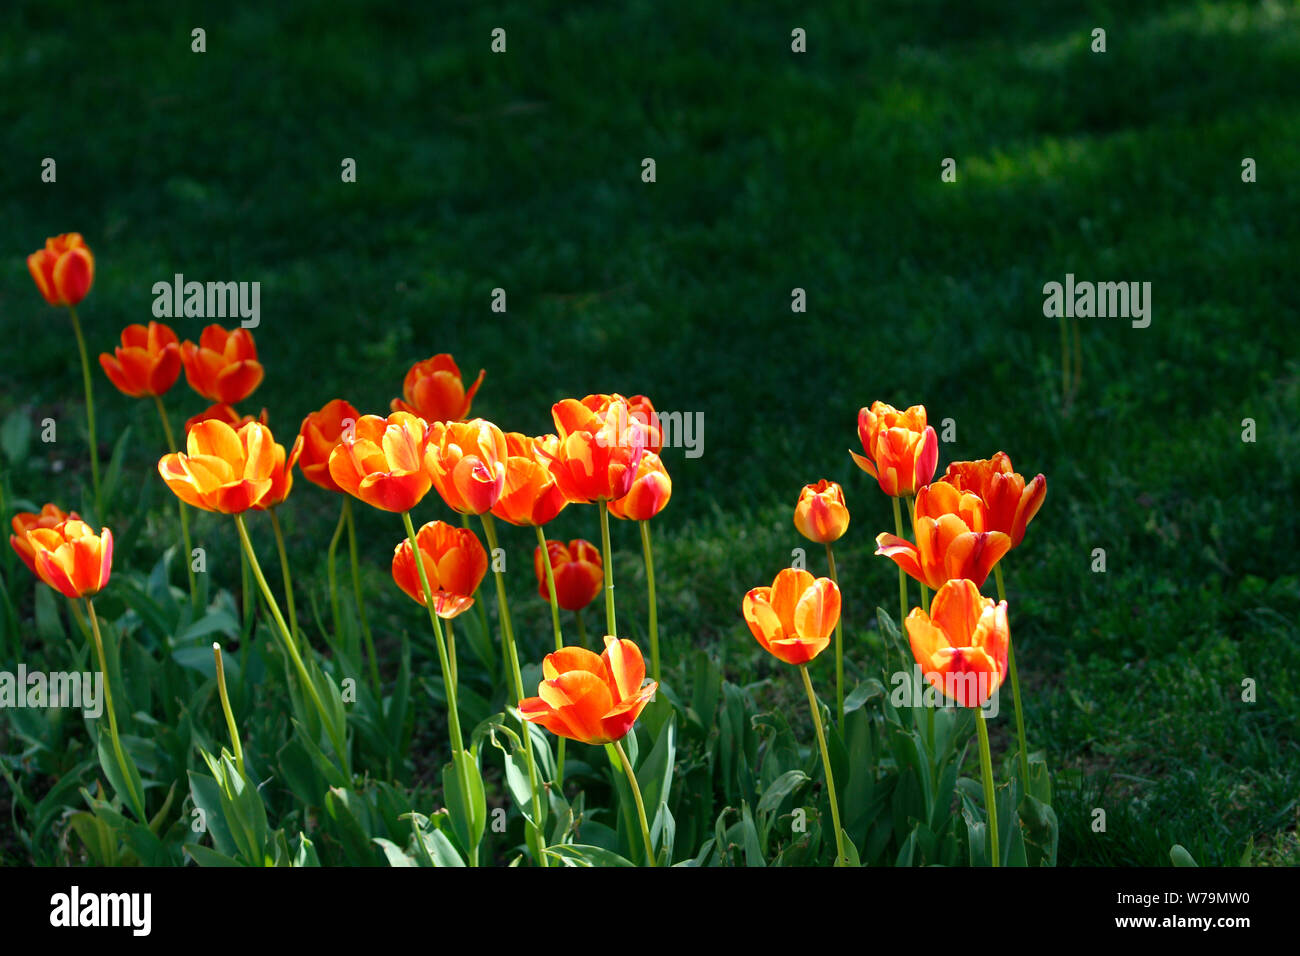 A number of fully blossomed orange-yellow tulips and their stems under sunlight with green foliage Stock Photo